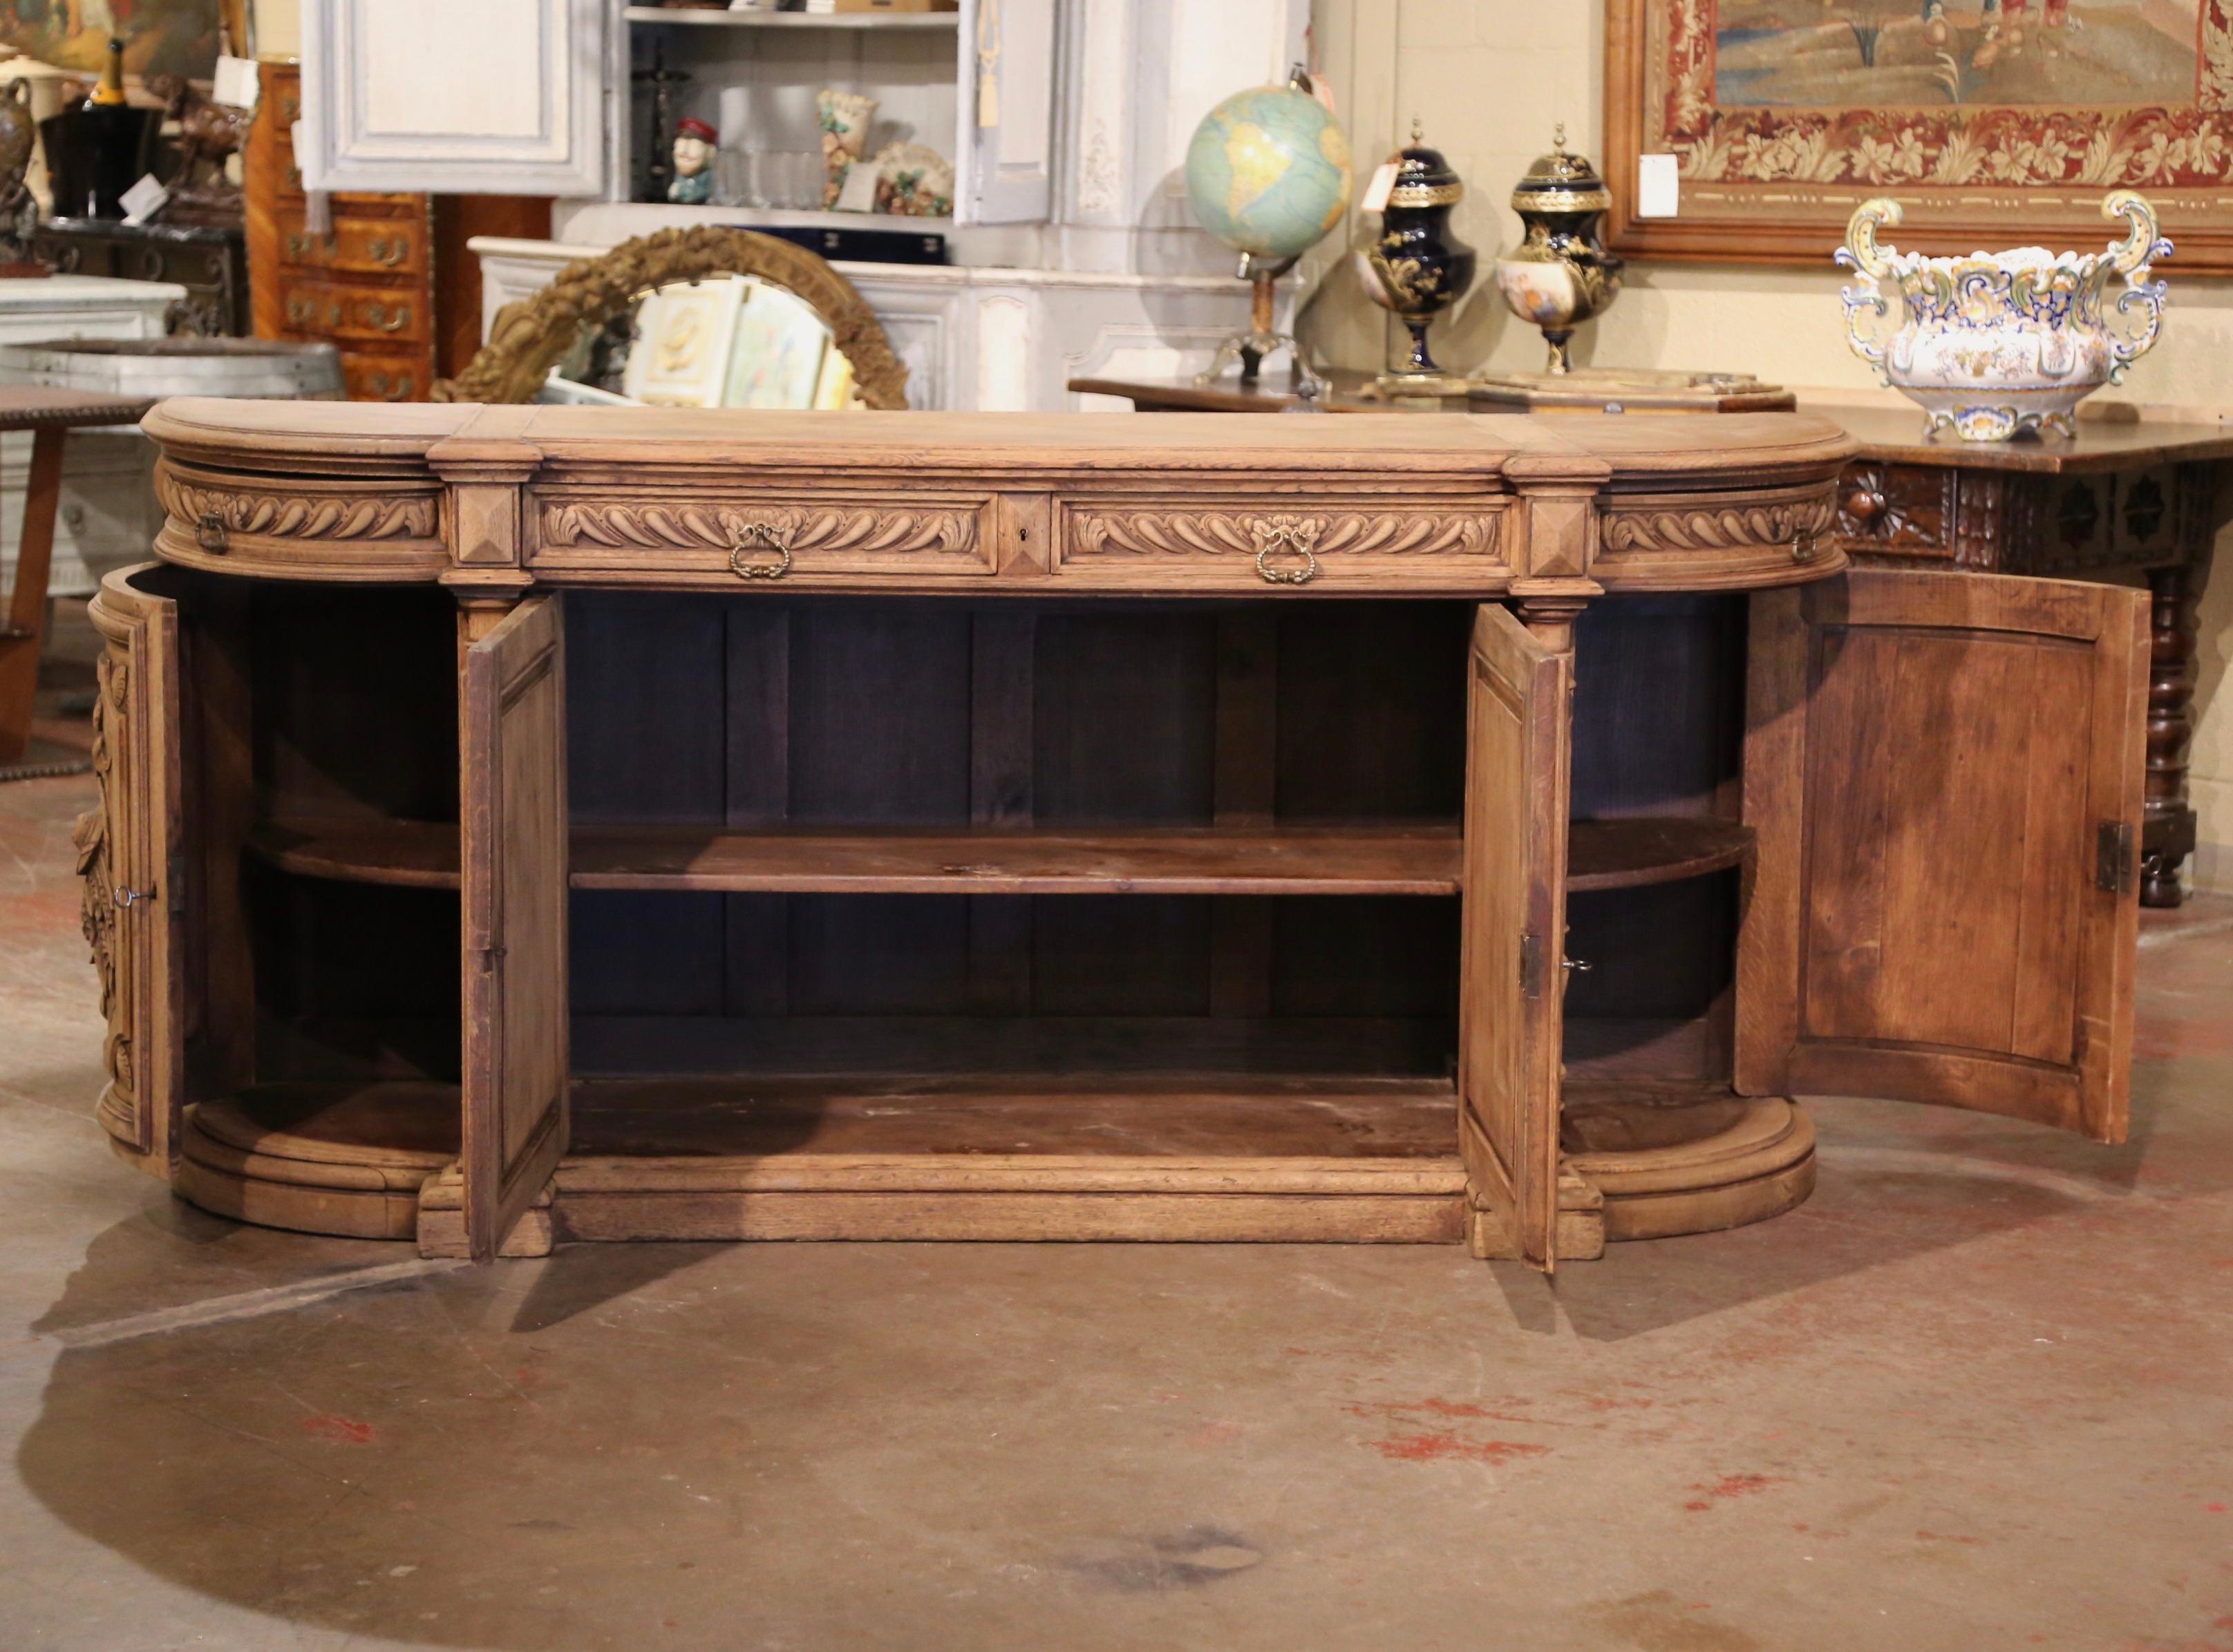 19th Century French Black Forest Carved Bleached Oak Four-Door Buffet Enfilade For Sale 5